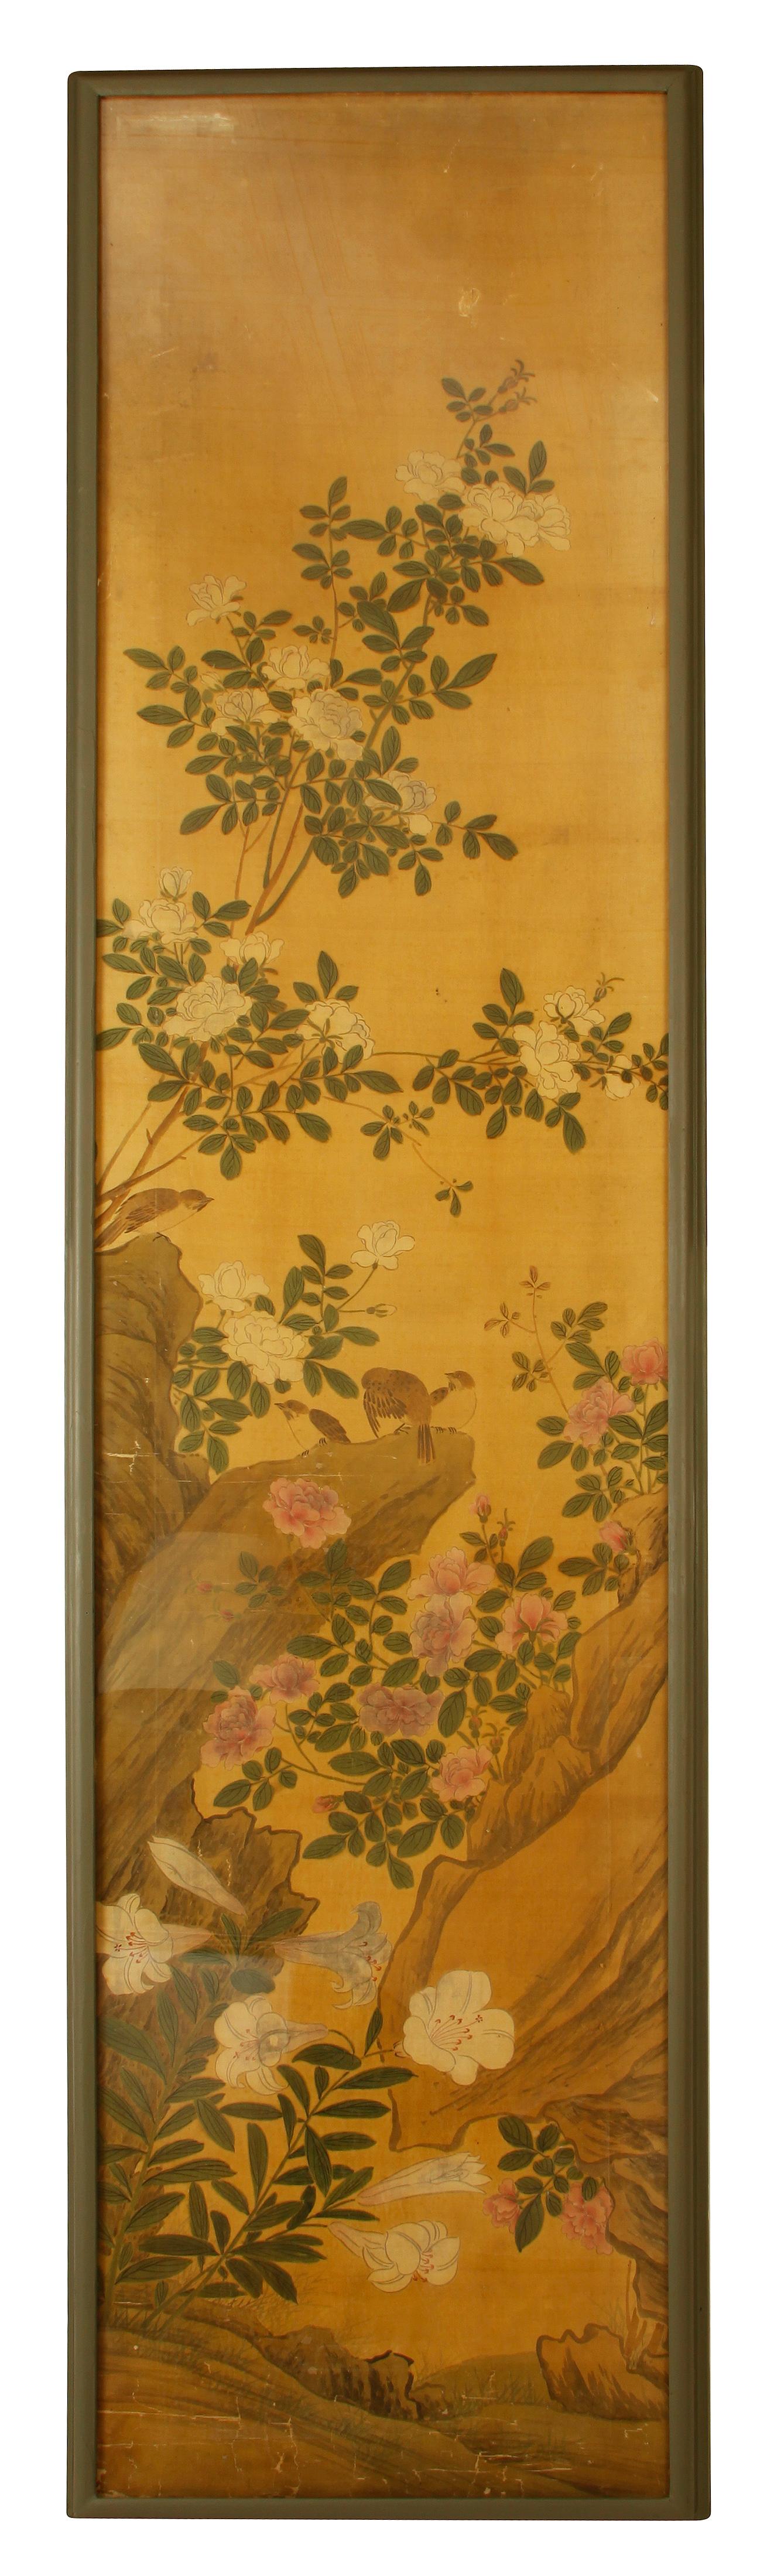 Hand-Painted Pair of Chinese Paintings on Silk